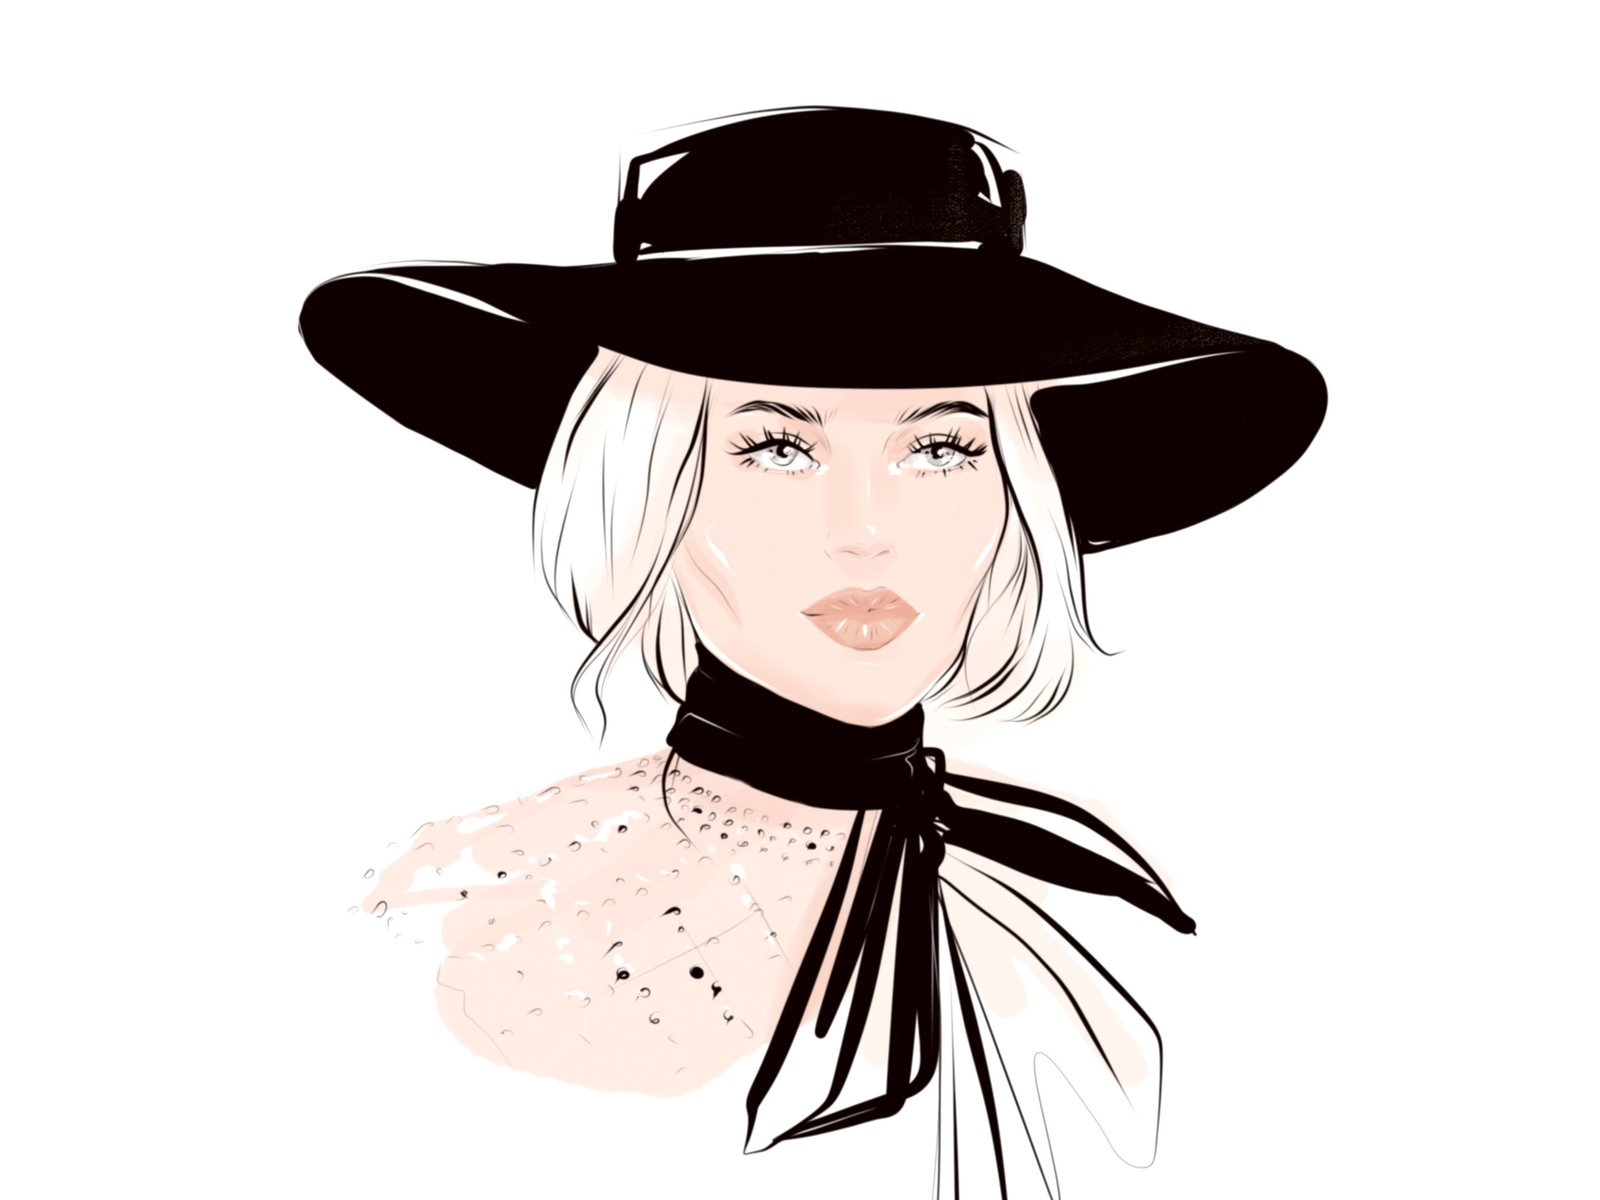 Linear drawing of a woman in a hat. Fashion art.